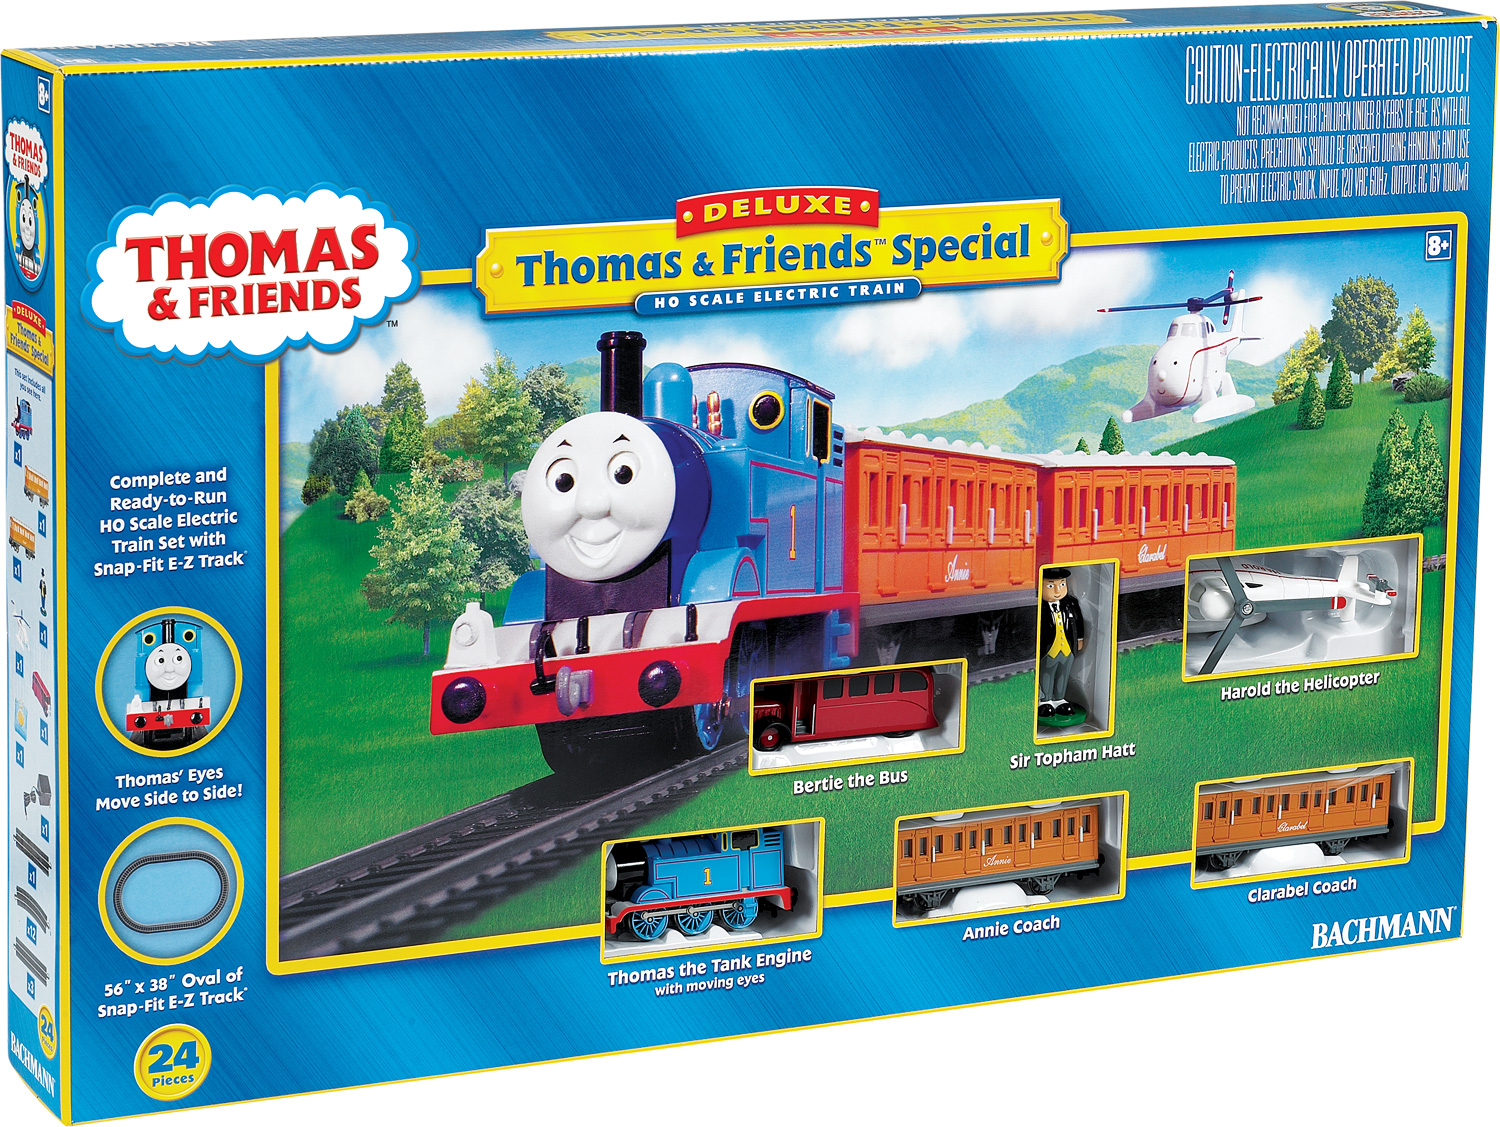 Deluxe Thomas & Friends Special HO-Scale Set, from Bachmann and